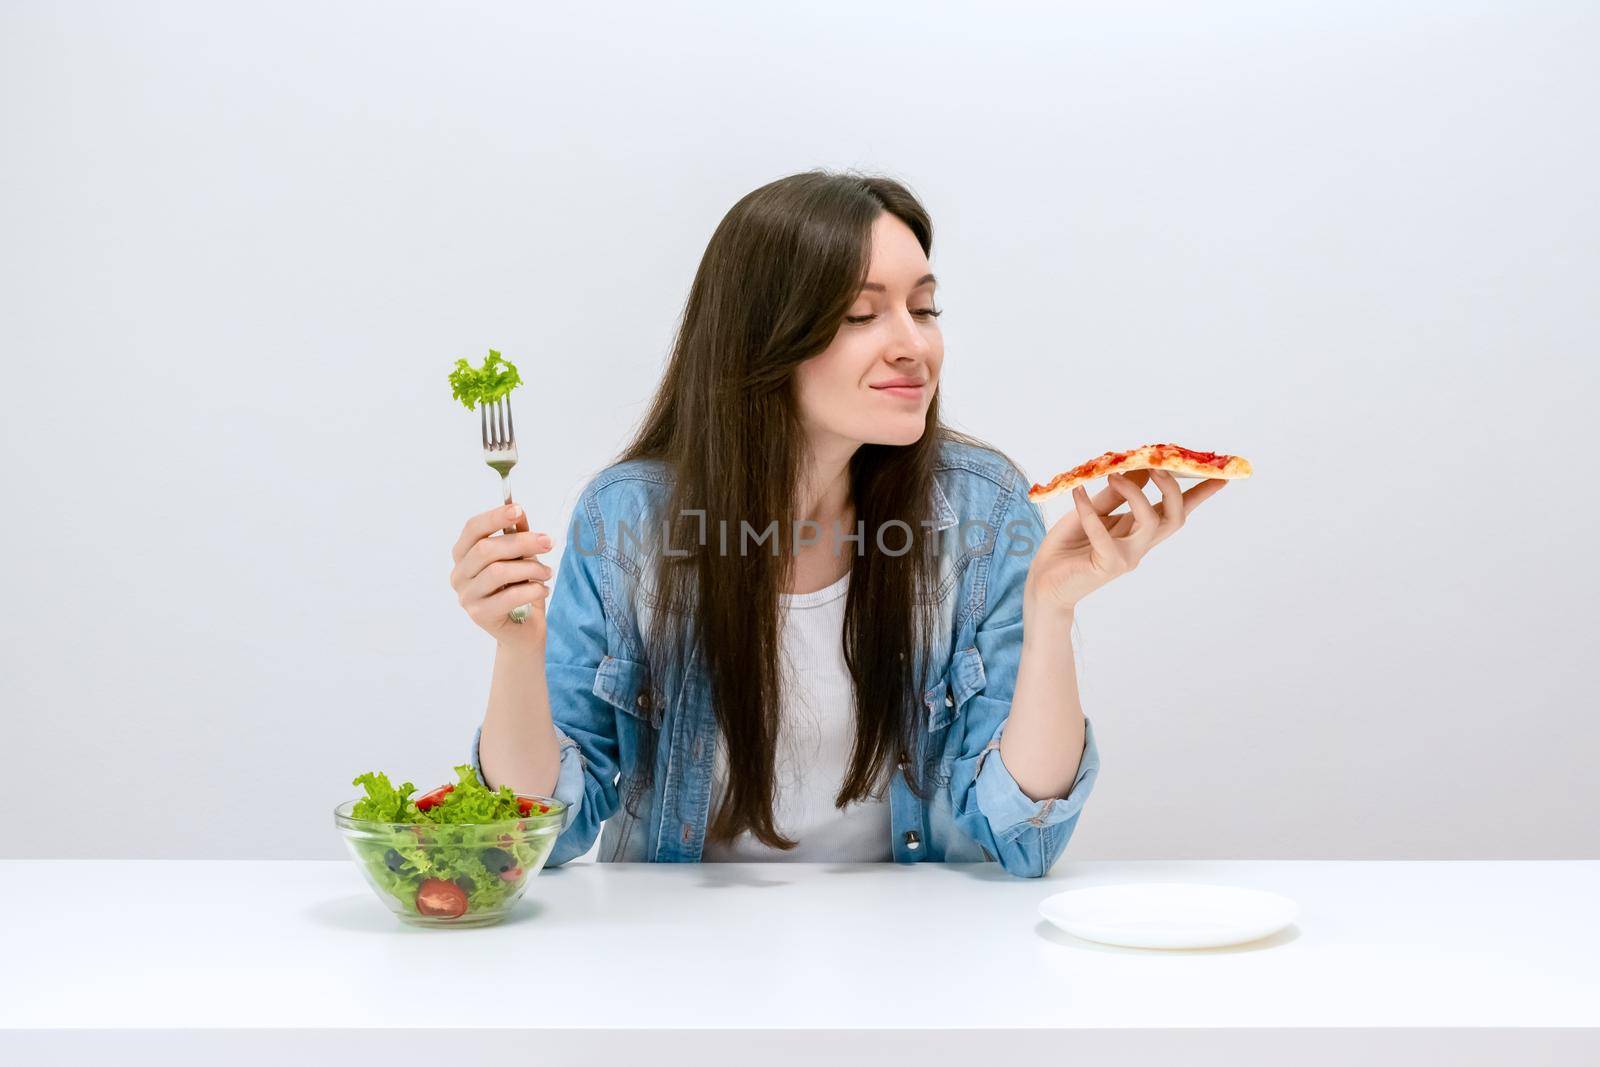 Young beautiful woman on a diet wants to choose pizza instead of salad by Svetlana_Belozerova